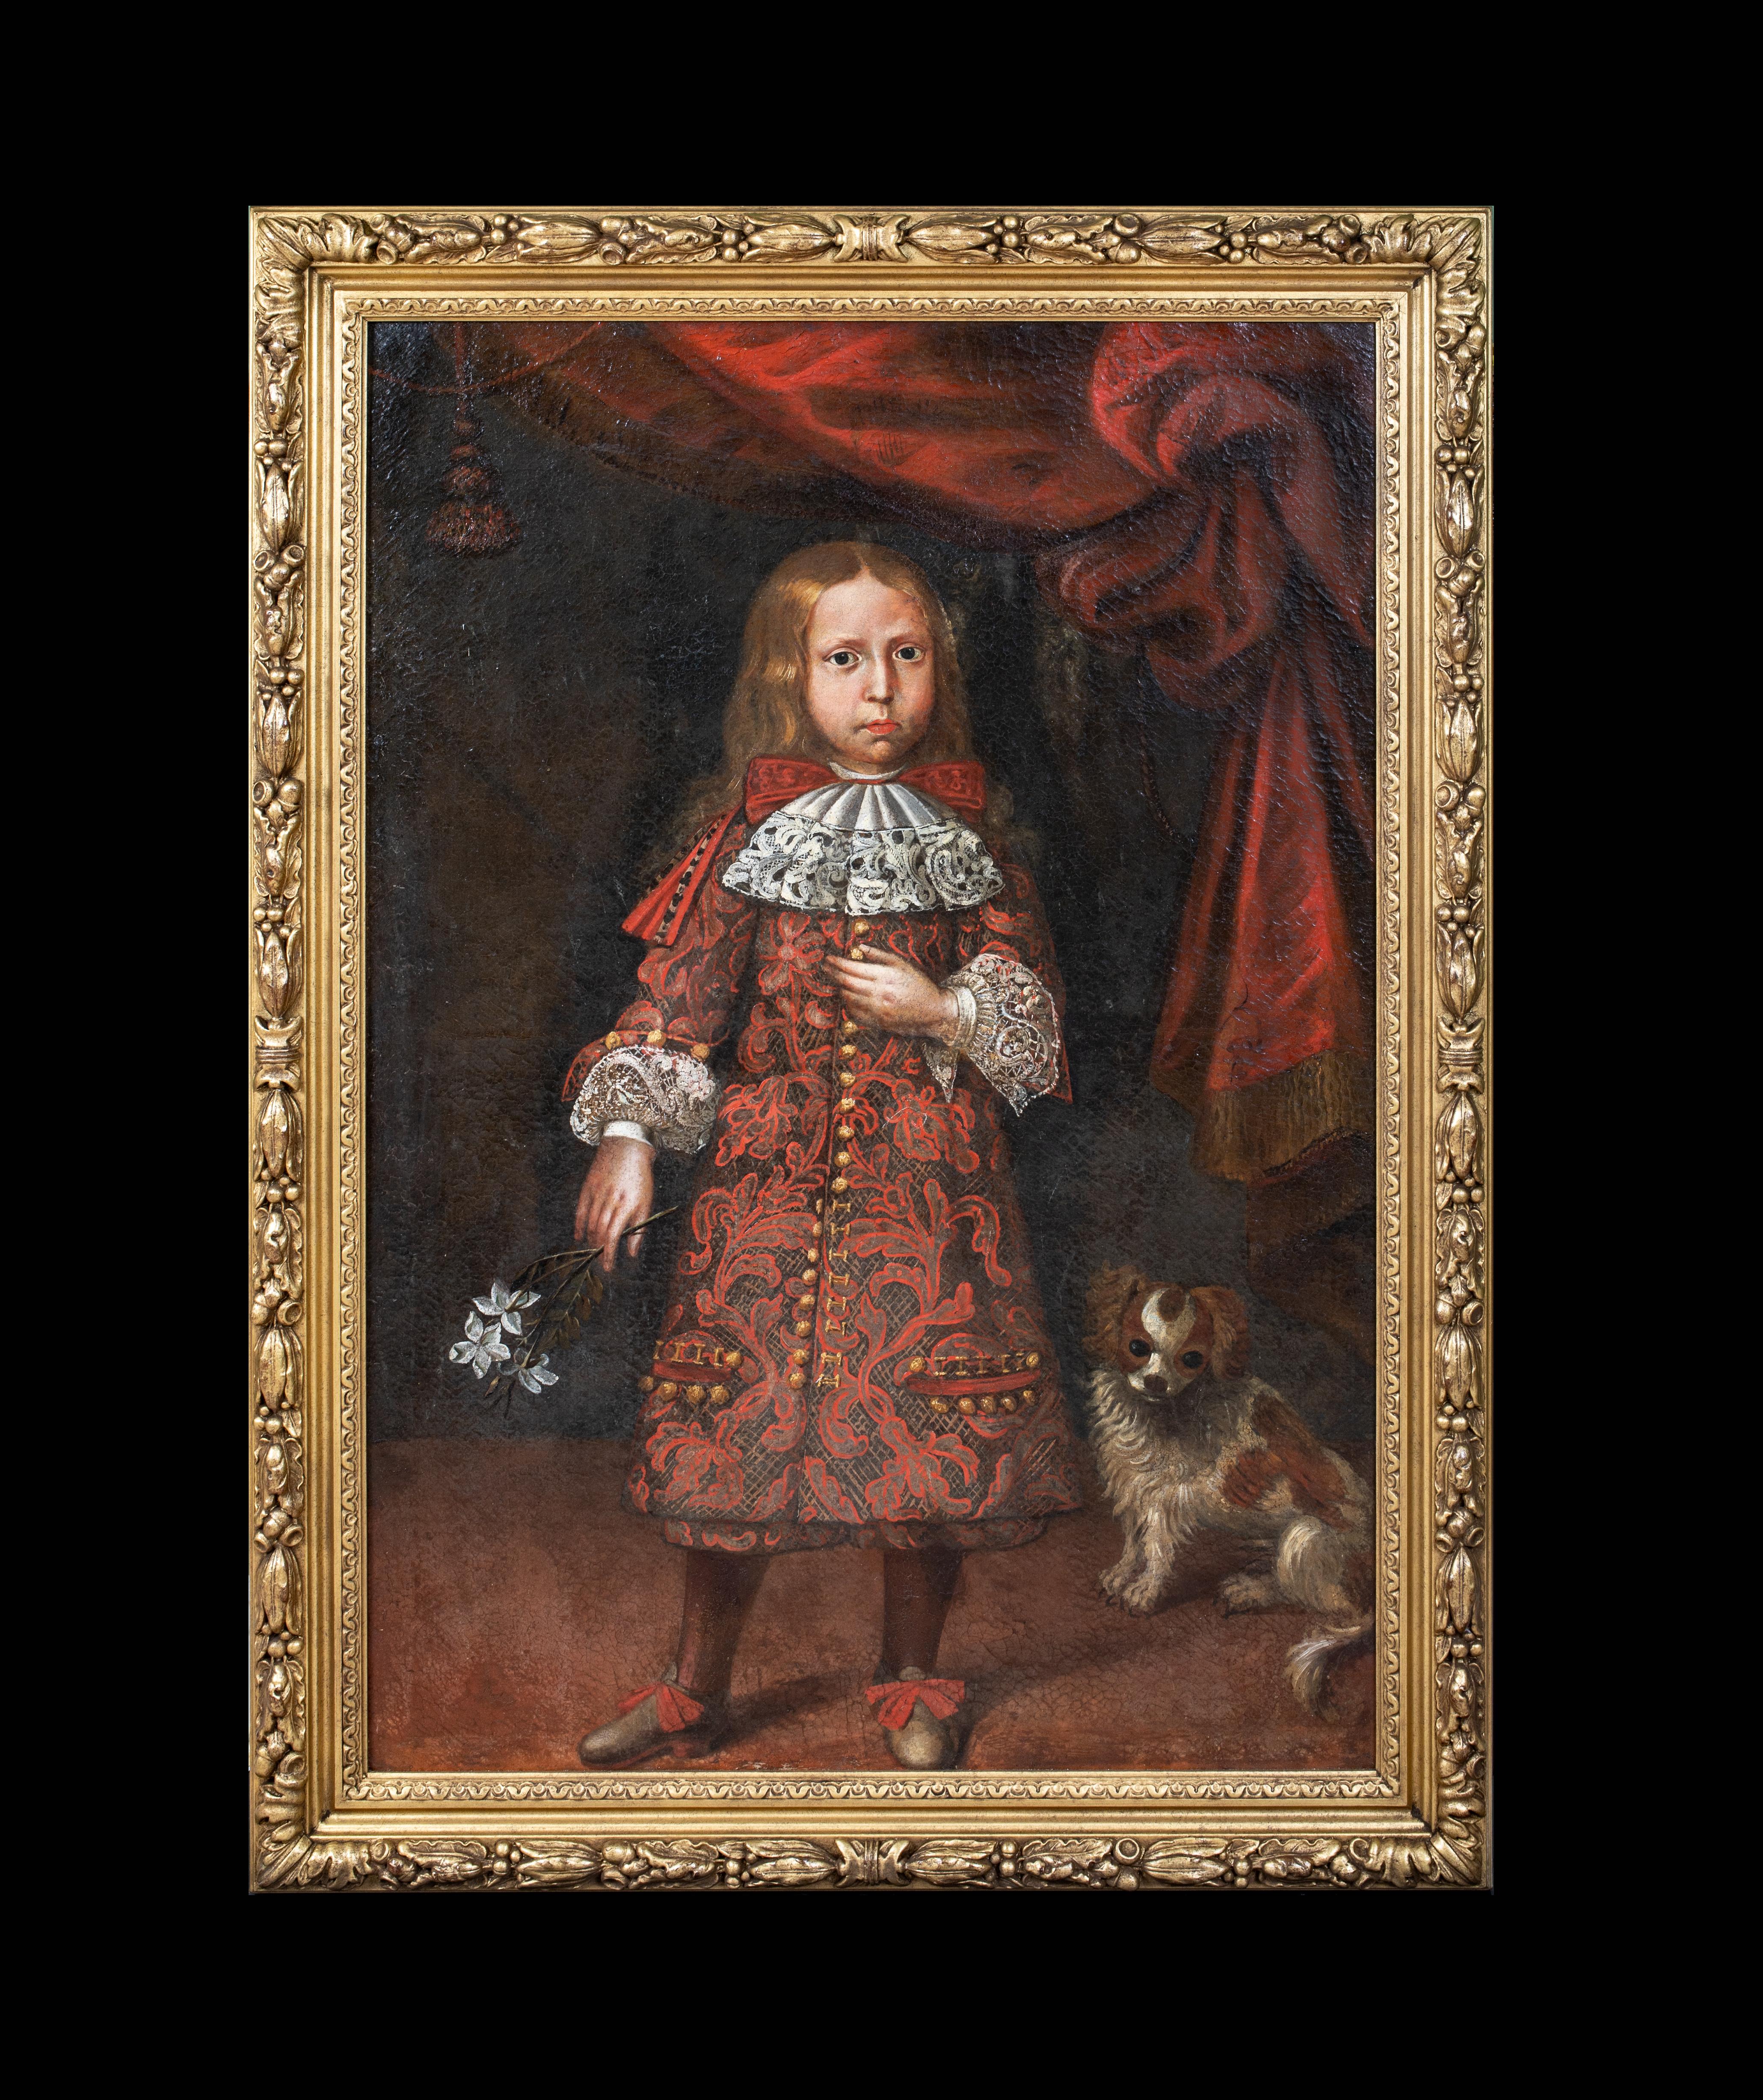 Portrait Of A Boy & Dog, 17th Century 

Piedmontese School circa 1620

Large early 17th Century Italian Old Master portrait of a boy and his dog, oil on canvas. Excellent quality and condition full length portrait of the boy in a draped interior